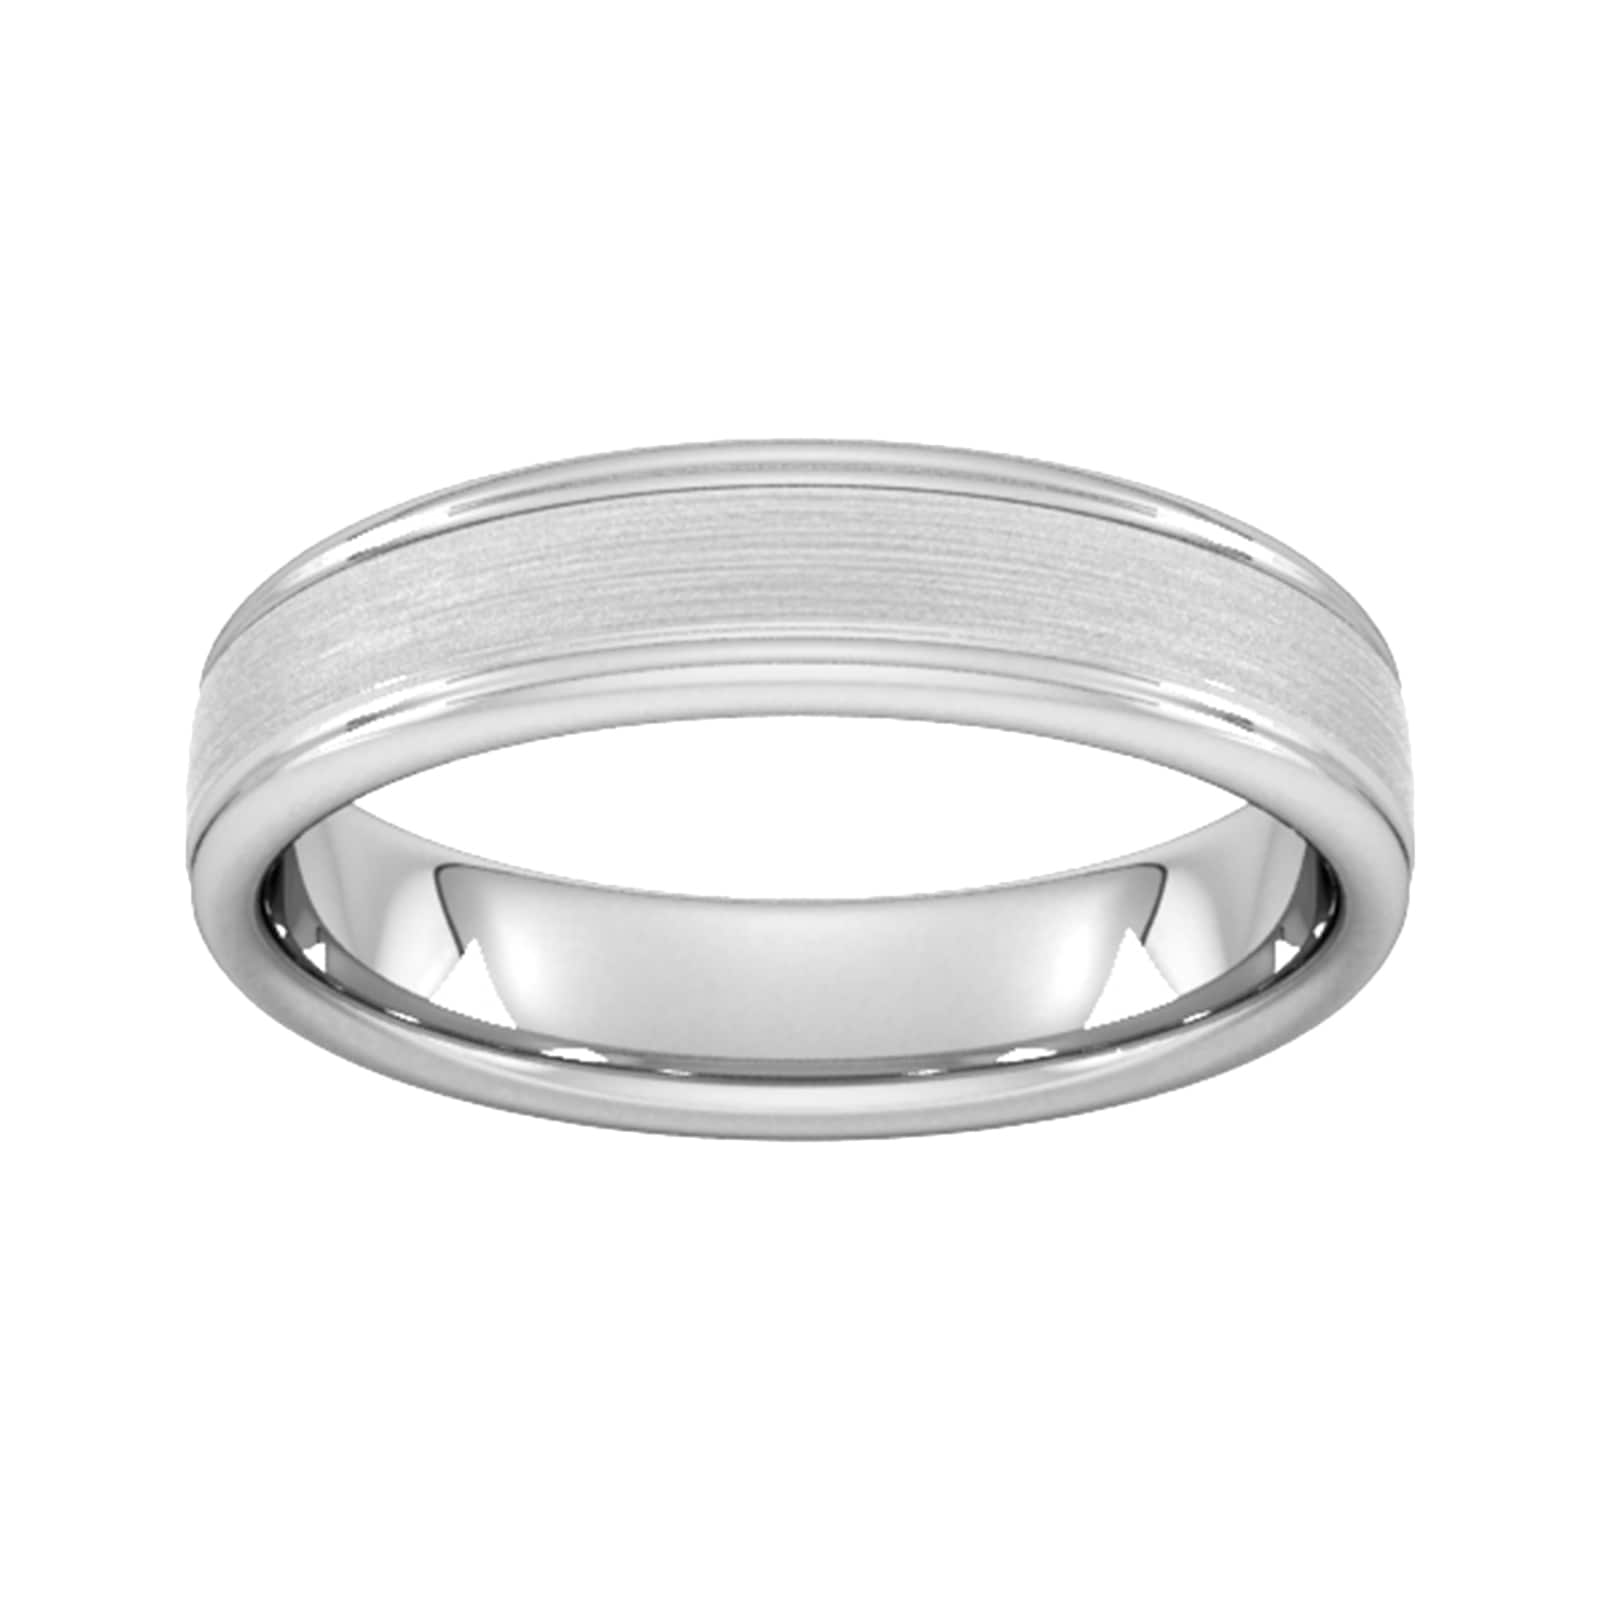 5mm Flat Court Heavy Matt Centre With Grooves Wedding Ring In 950 Palladium - Ring Size T